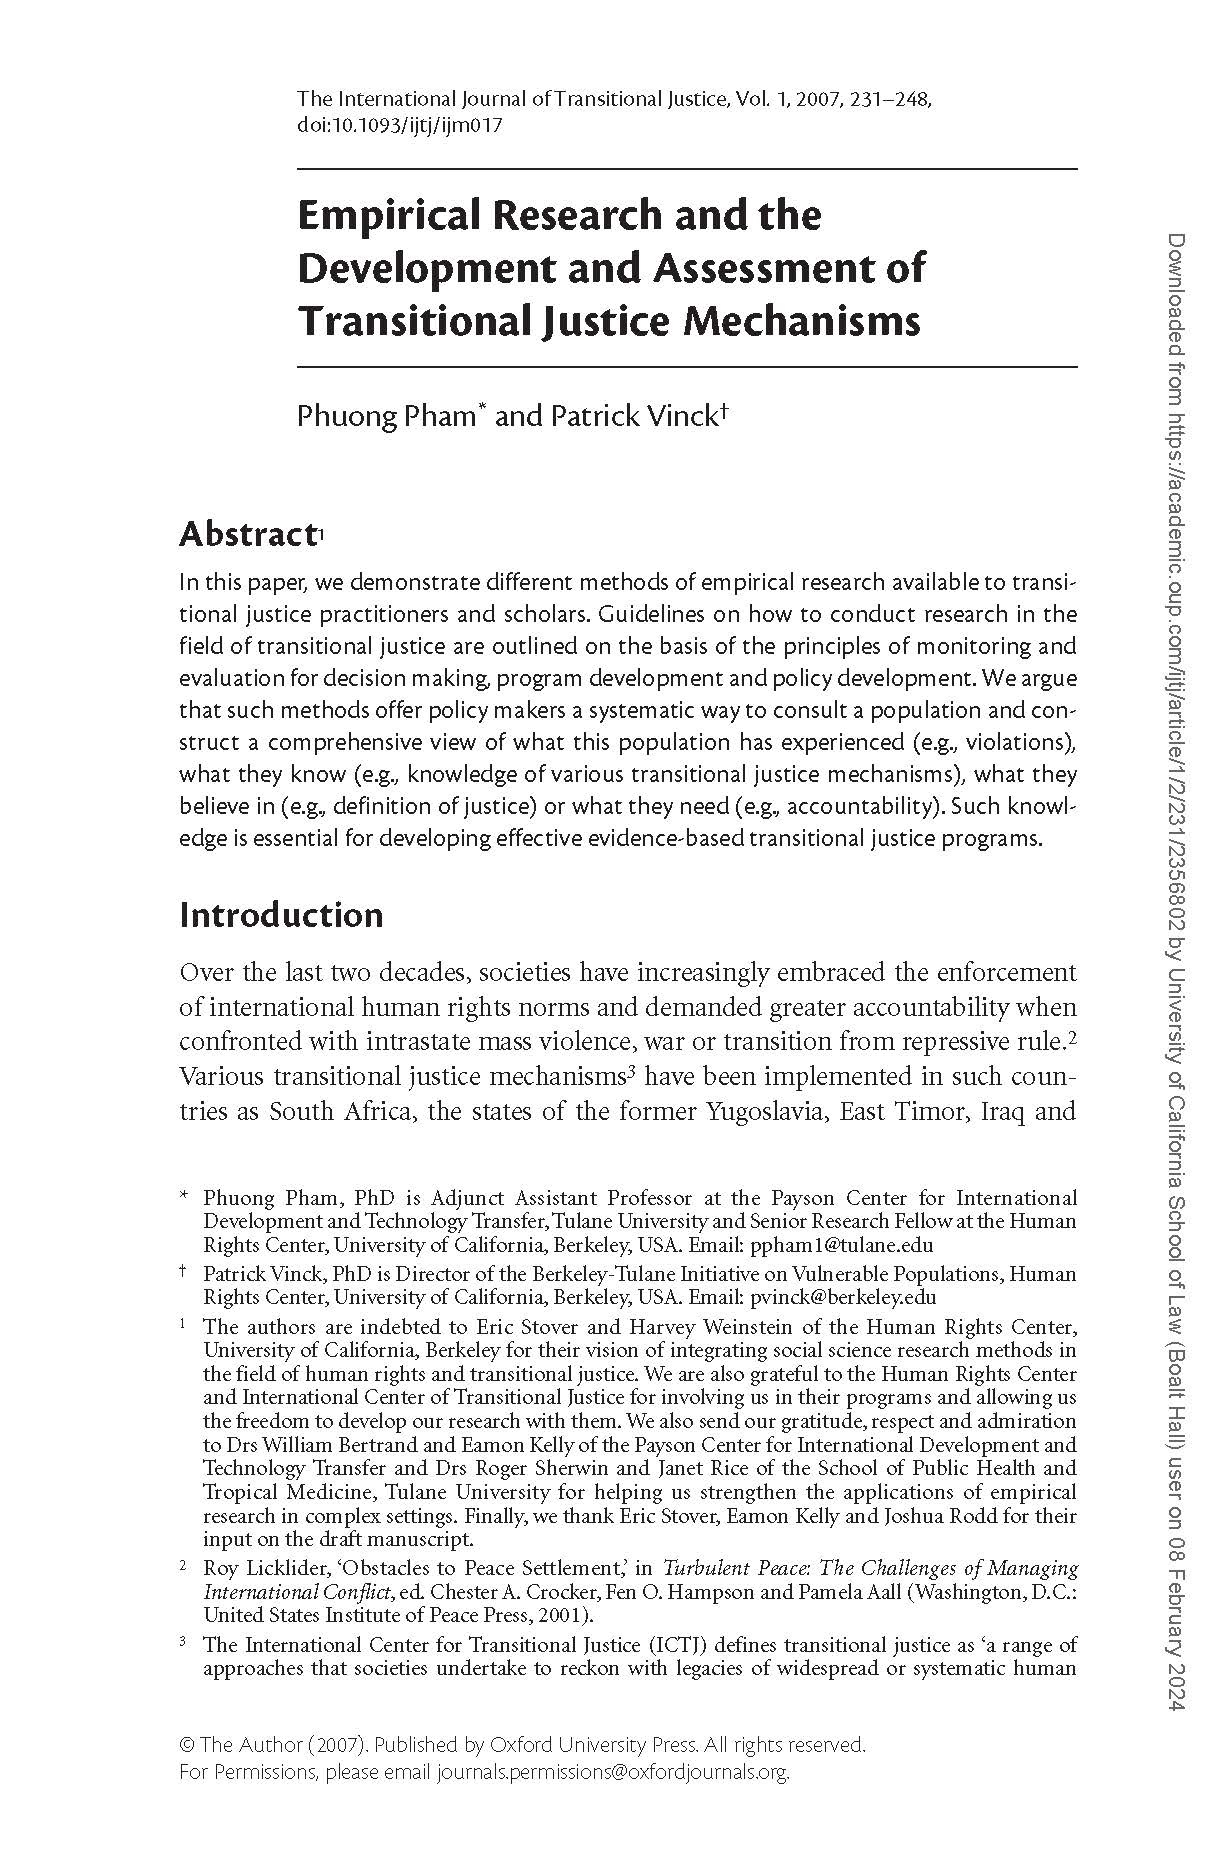 Pages from Empirical Research and the Development and Assessment of Transitional Justice Mechanisms